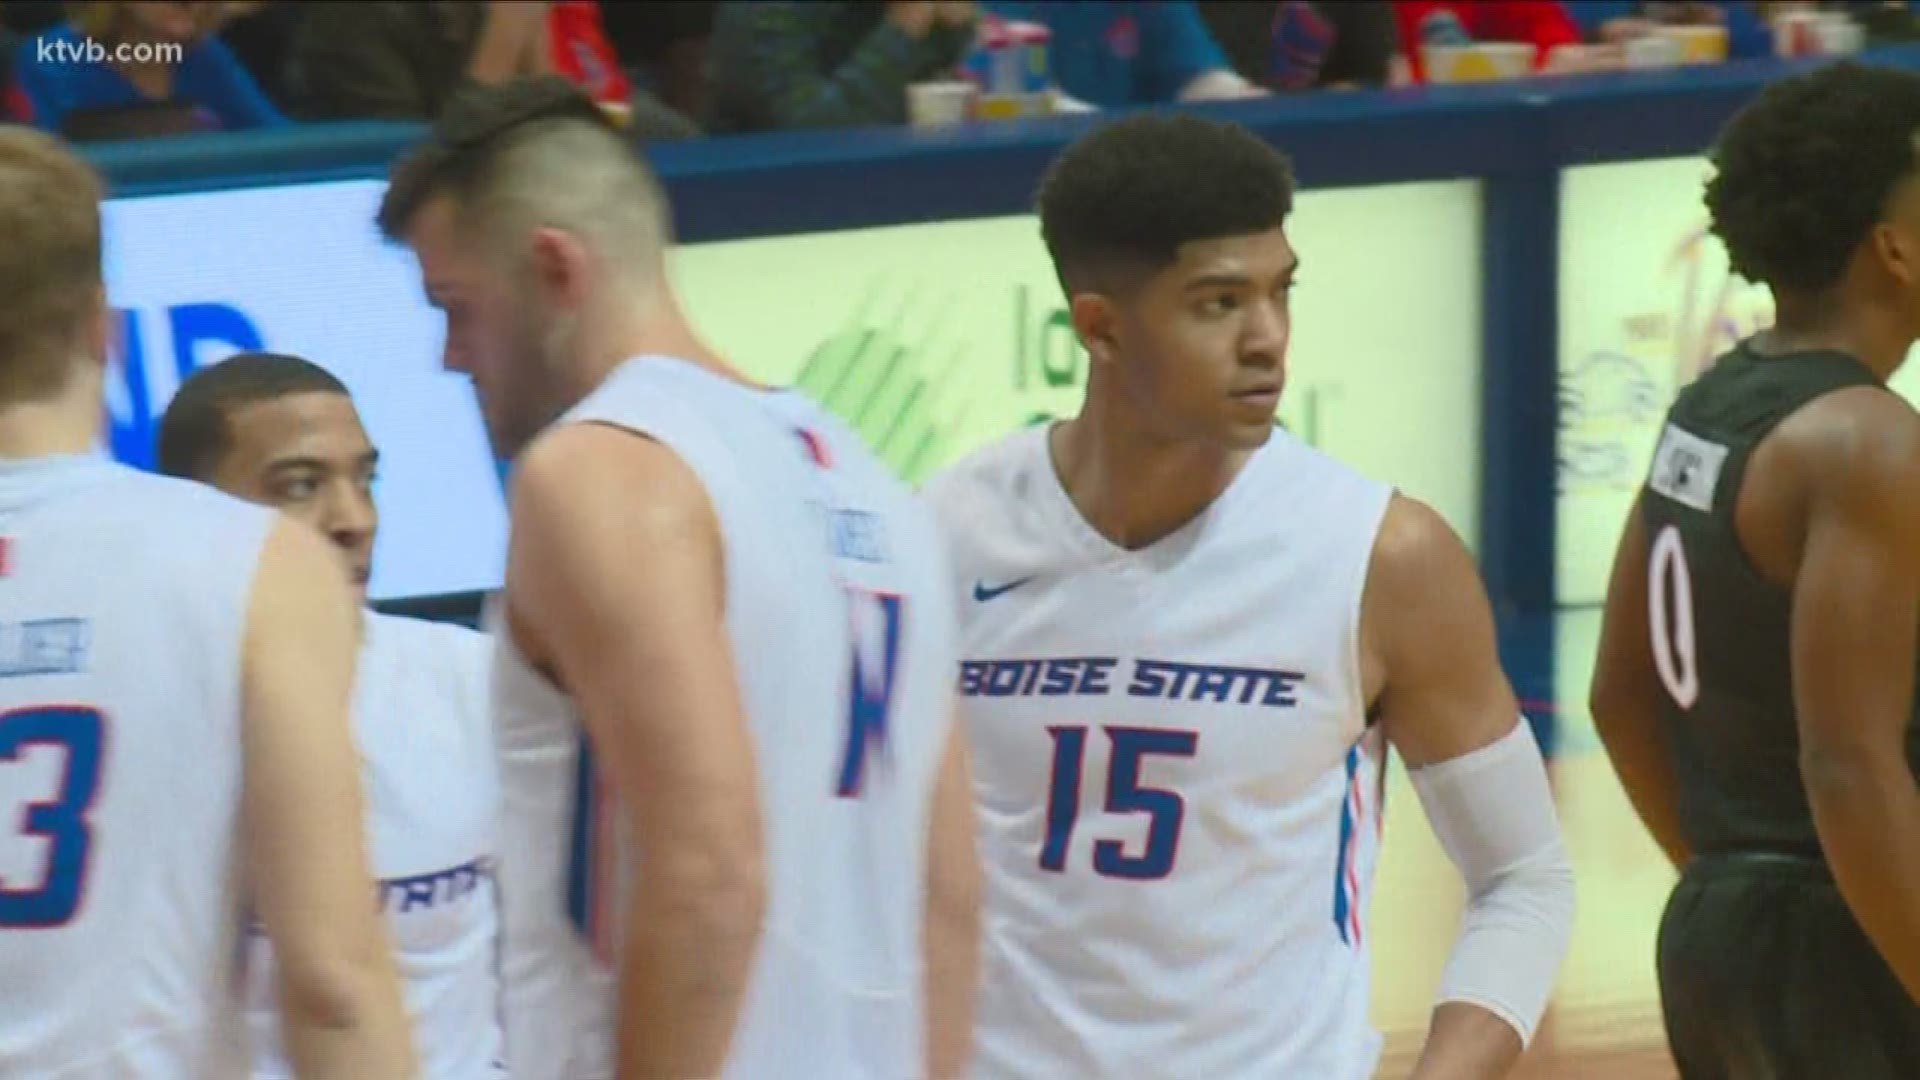 Thanks to a lot of hard work and plenty of natural talent, Boise State's Chandler Hutchison will soon be on the roster of a NBA team.